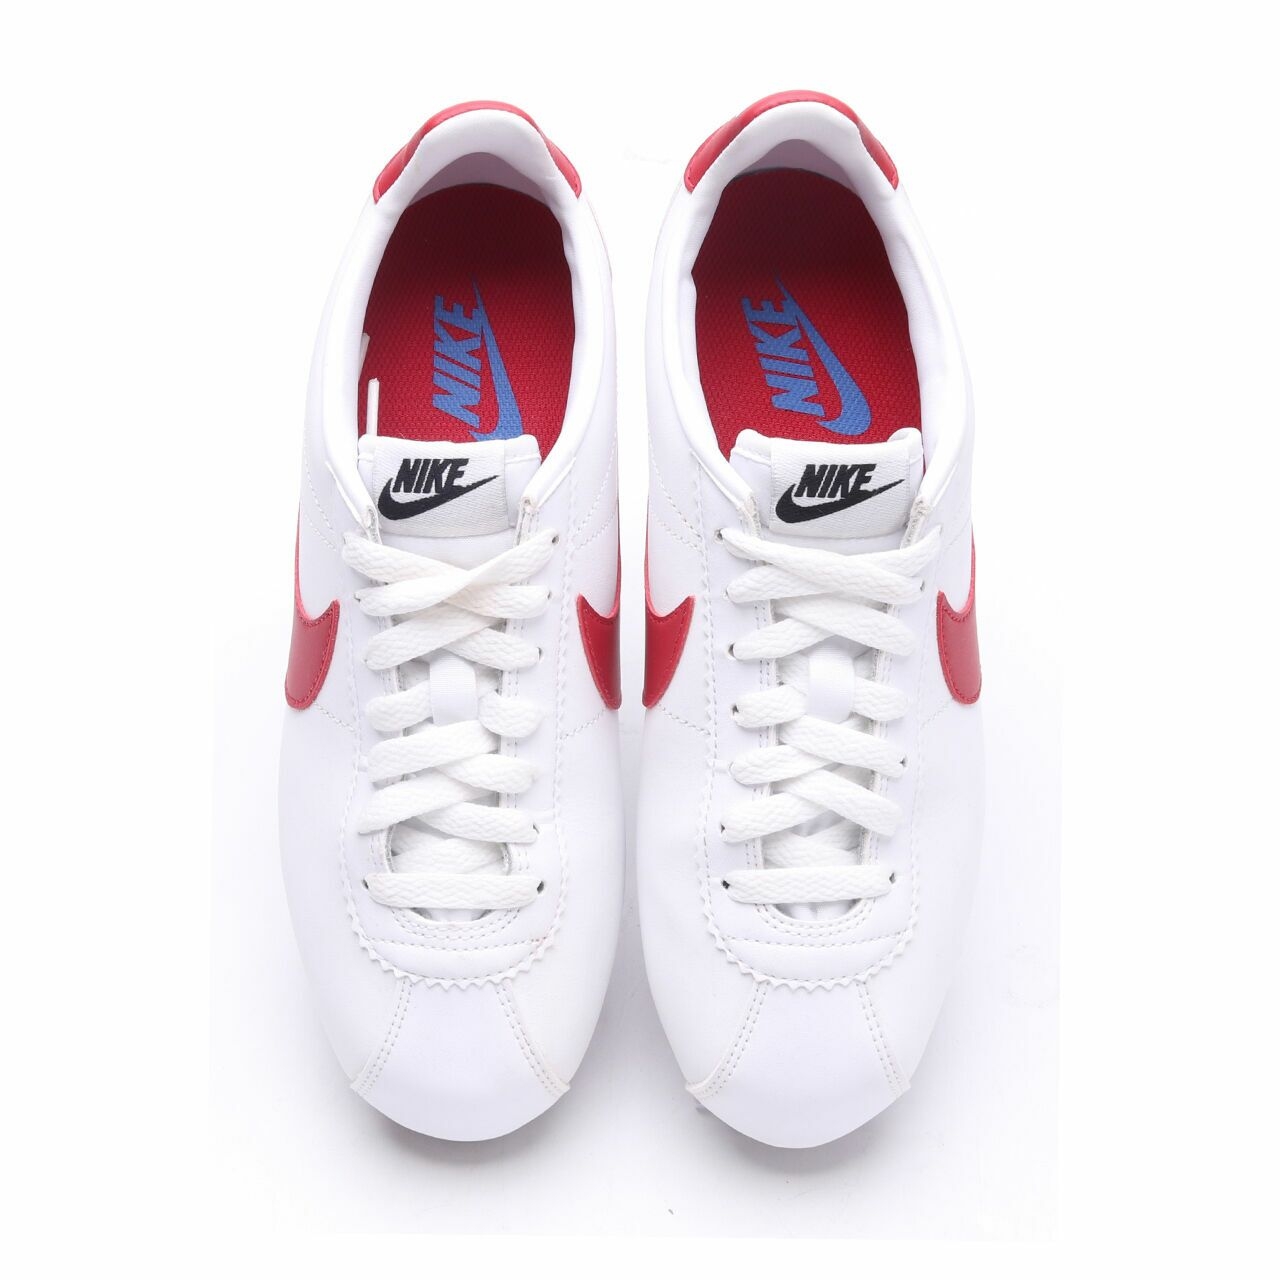 Nike WMNS Classic Cortez Leather Sneakers